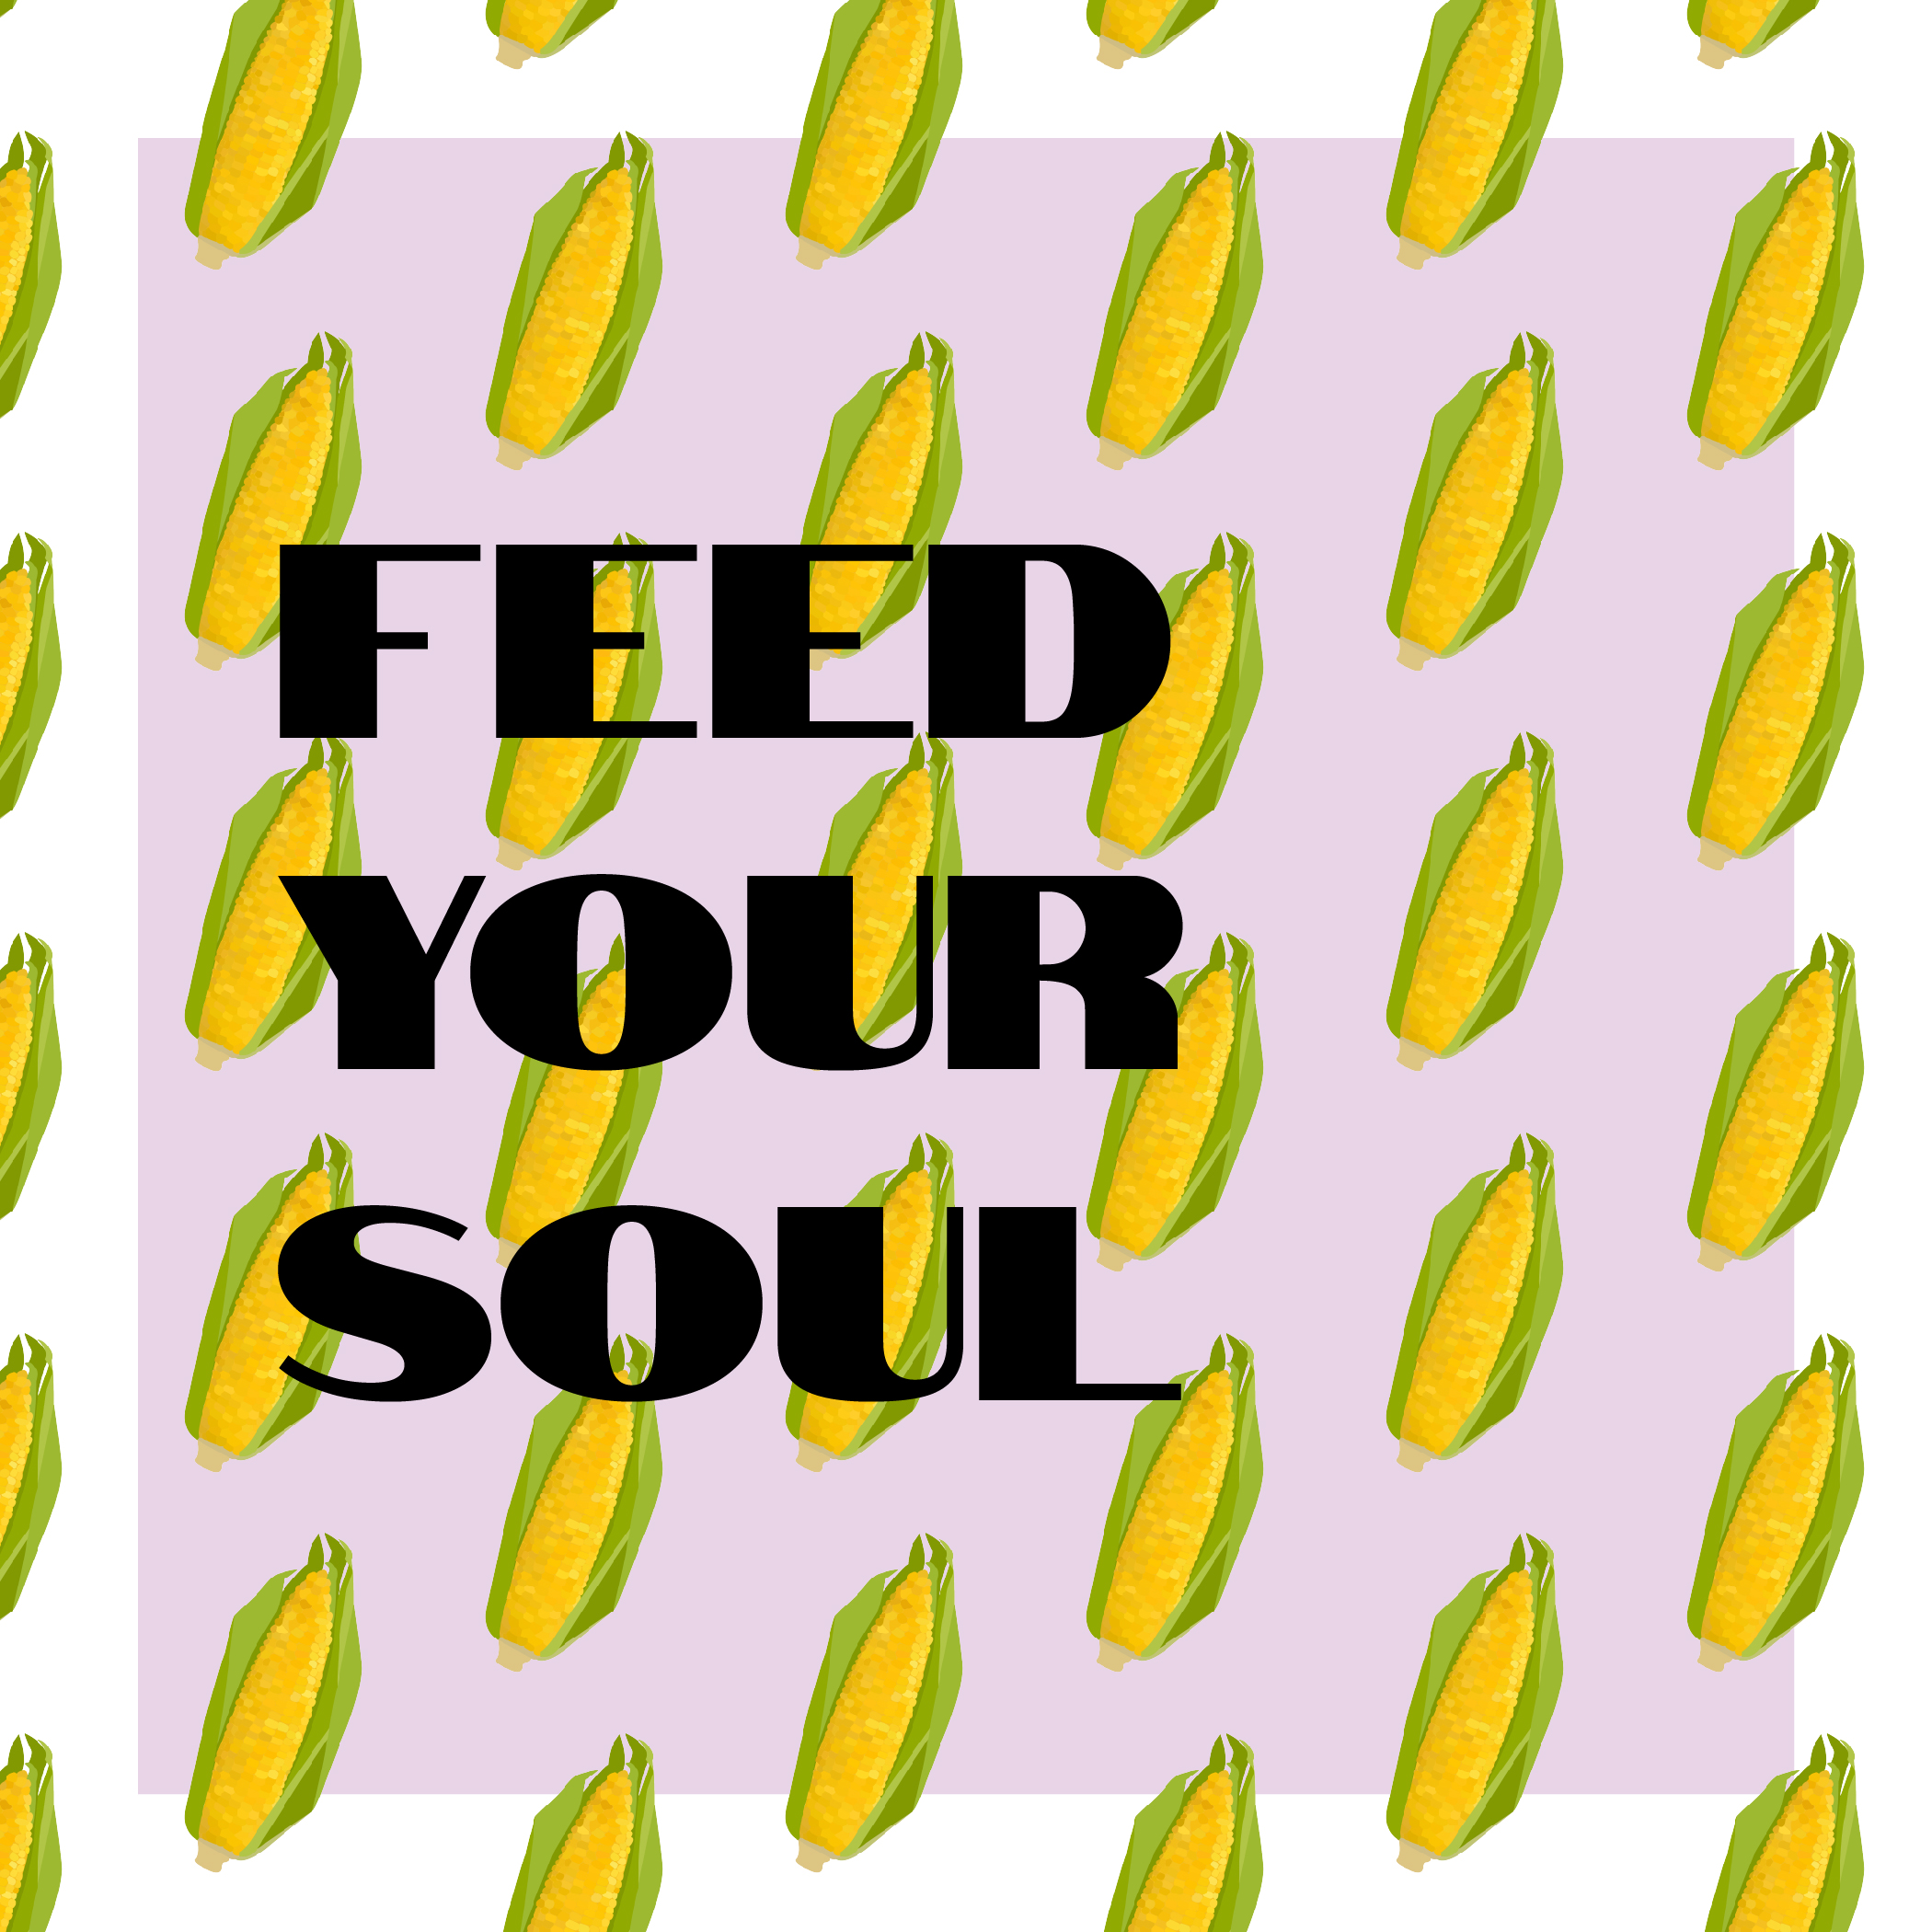 Feed Your Soul - The Sylvia Center